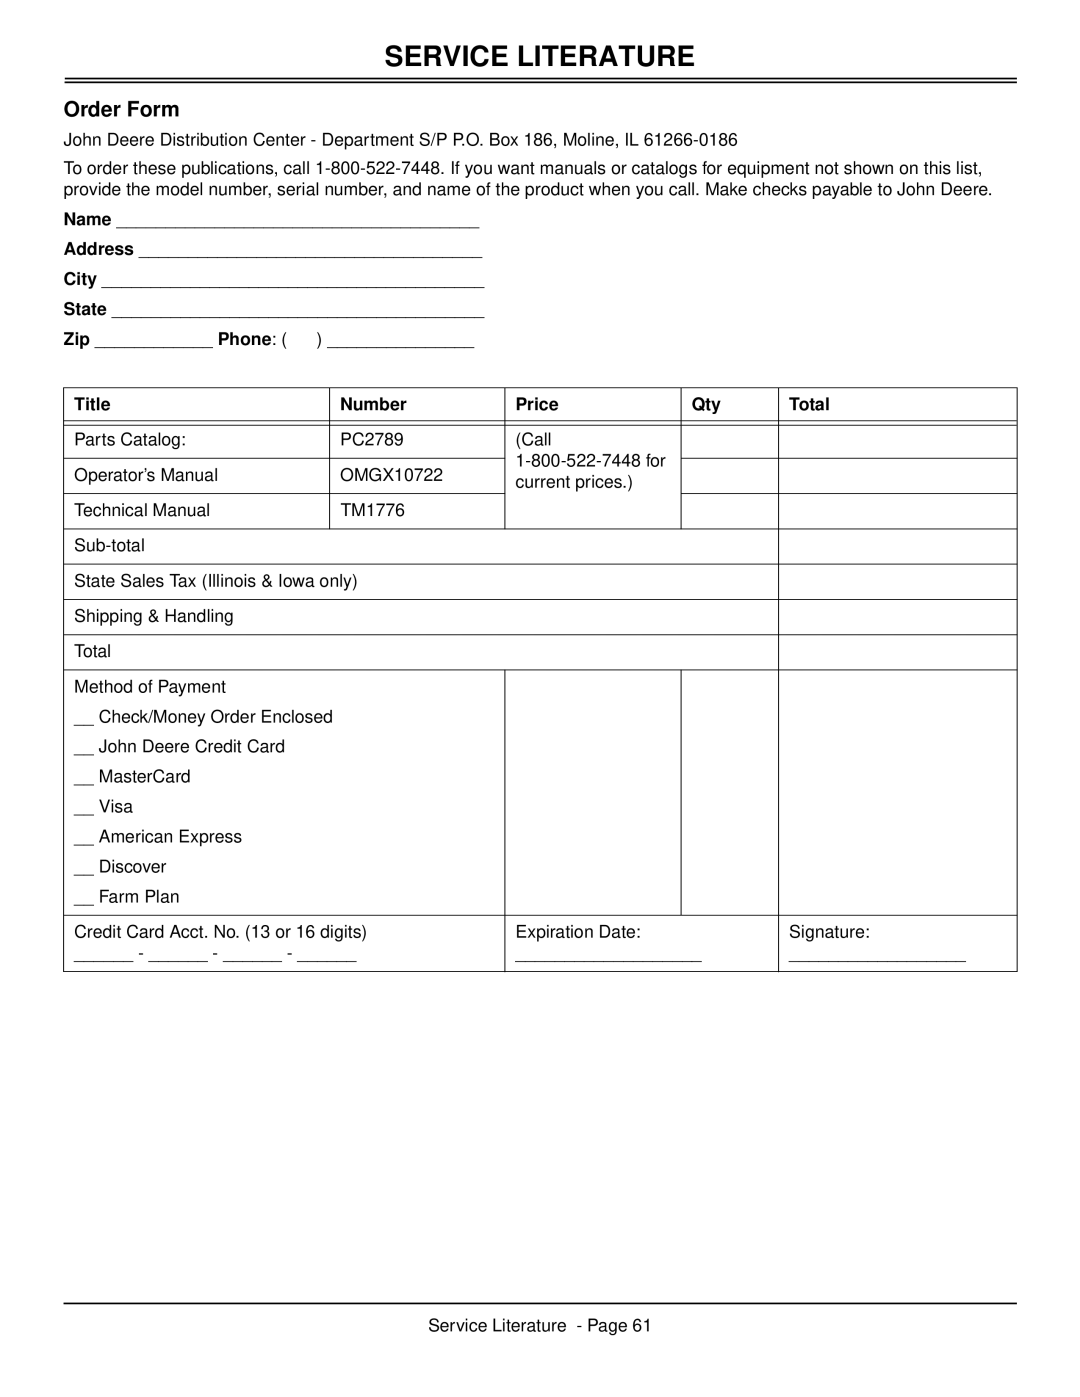 Scotts S2546 manual Service Literature, Order Form, Title Number Price Qty Total 